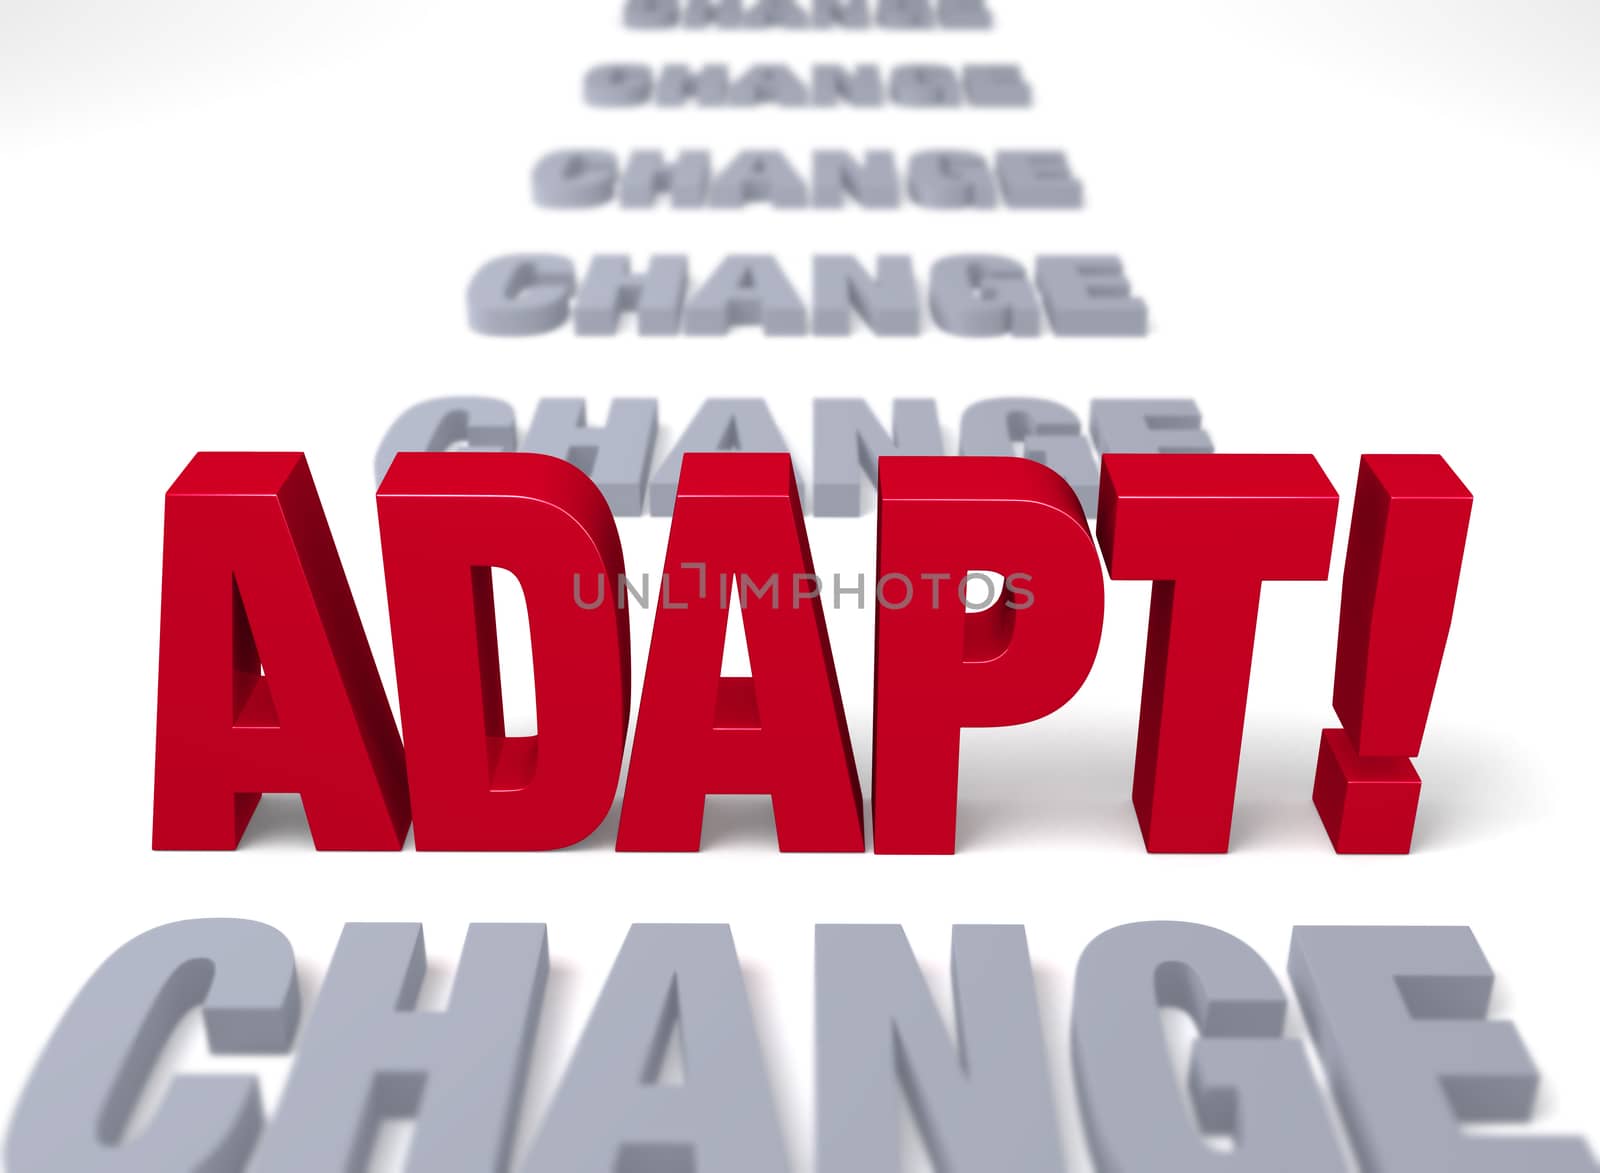 A shiny, red "ADAPT!" stands up in a row of plain gray "CHANGE" receding into the background. Focus is on "ADAPT!".  Isolated on white.